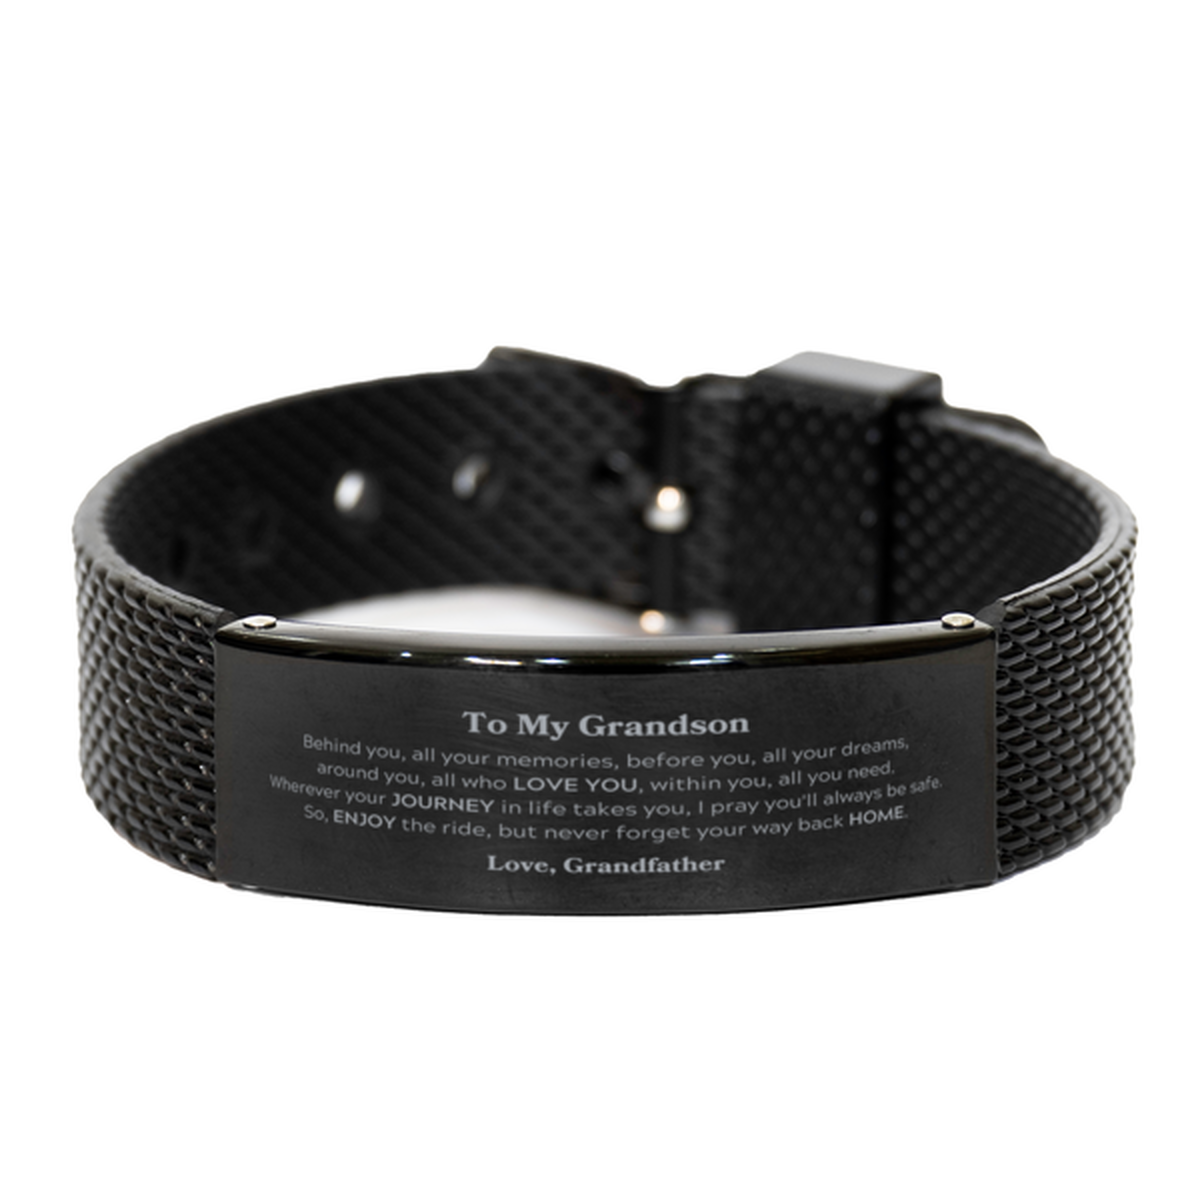 To My Grandson Graduation Gifts from Grandfather, Grandson Black Shark Mesh Bracelet Christmas Birthday Gifts for Grandson Behind you, all your memories, before you, all your dreams. Love, Grandfather